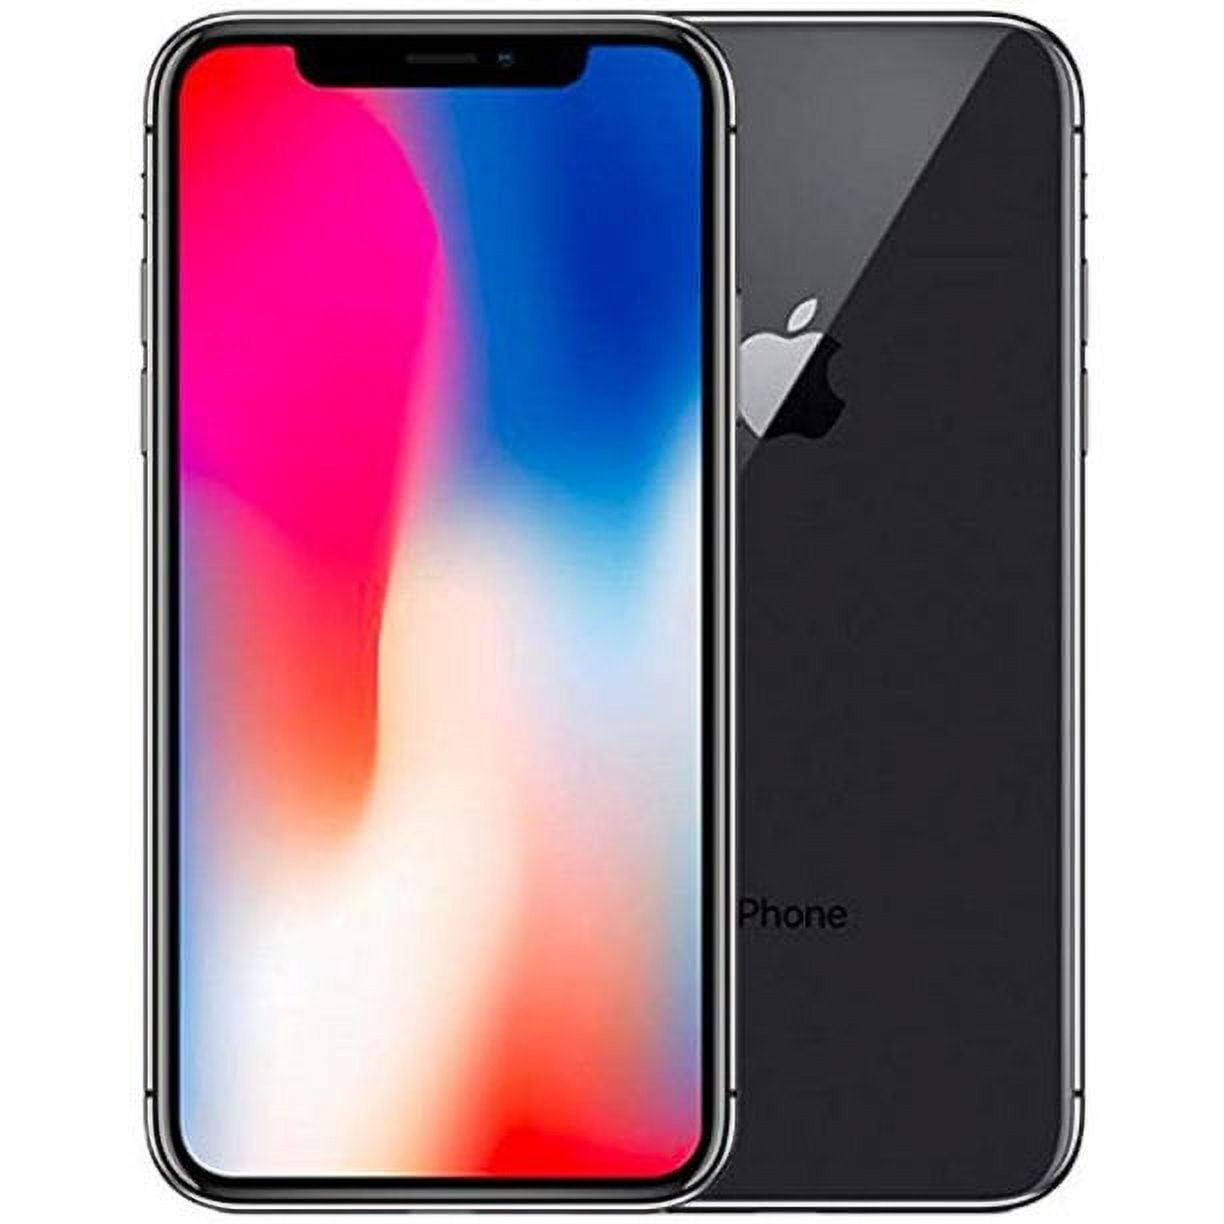 Restored Apple iPhone X, 64GB, Space Gray - For AT&T / T-Mobile  (Refurbished)